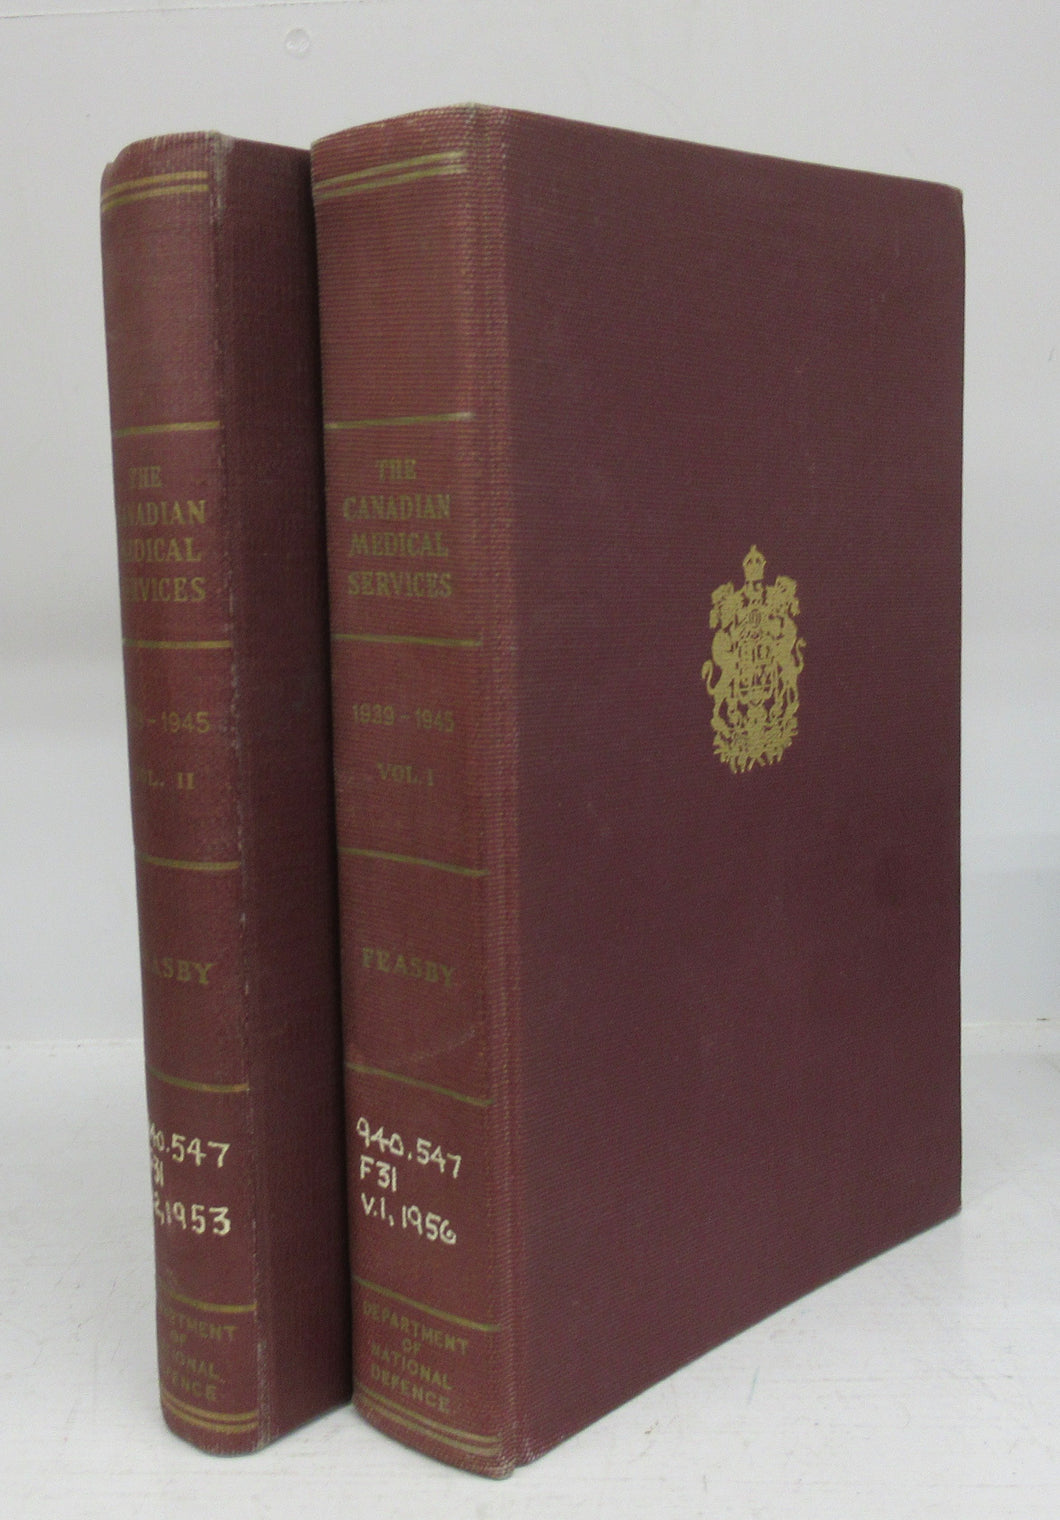 Offical History of the Canadian Medical Services 1939-1945. Volume One: Organization and Campaigns. Volume Two: Clinical Subjects